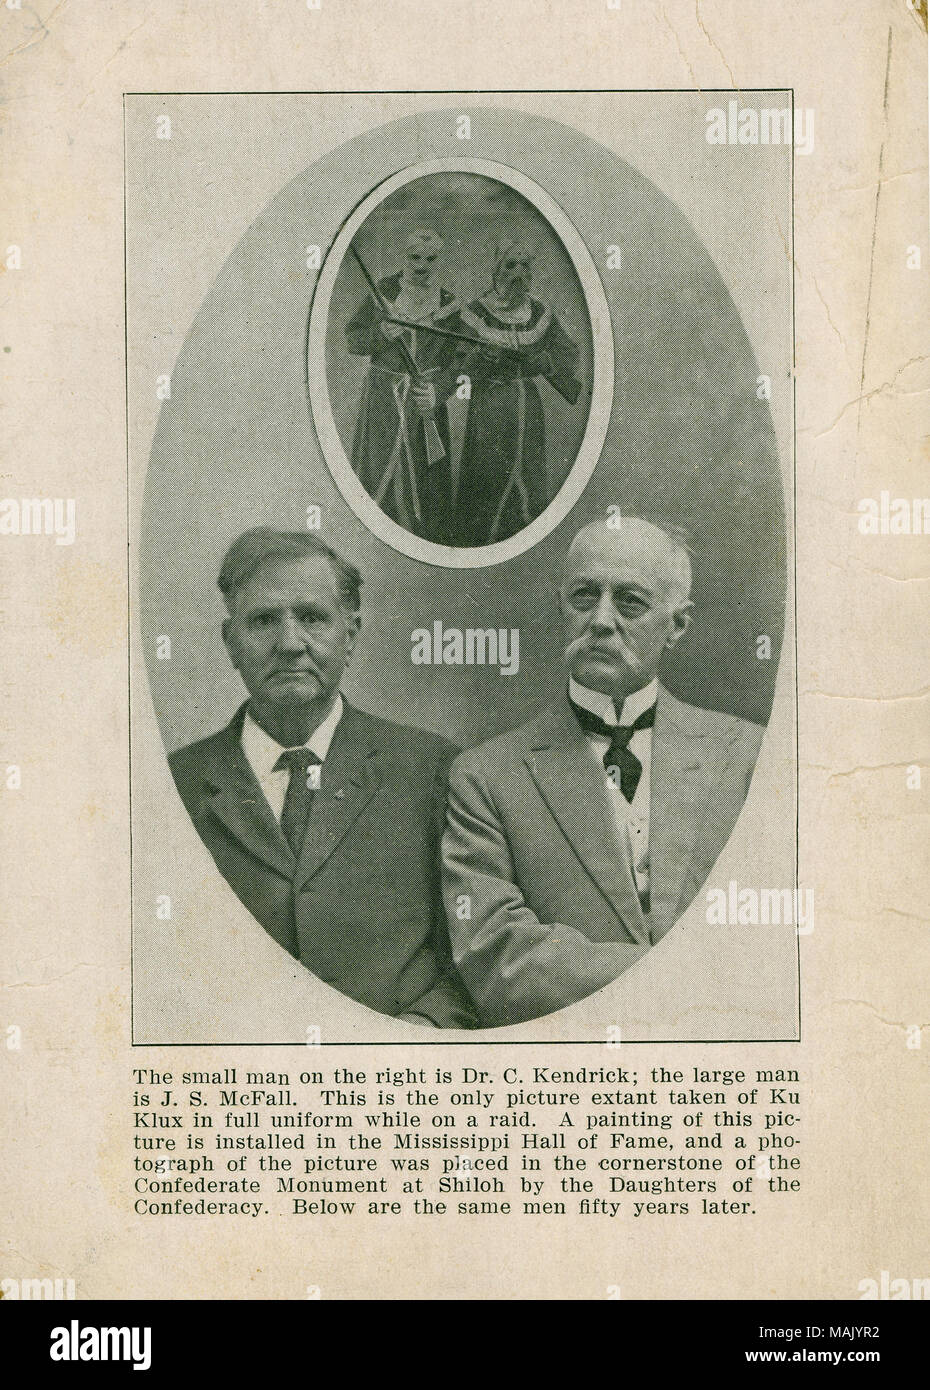 Photograph of two men in civilian suits beneath an image of two Ku Klux Klansmen with rifles. Text printed below image: 'the small man on the right is Dr. C. Kendrick; the large man is J.S. McFall. This is the only picture extant taken of Ku Klux in full uniform while on a raid. A painting of this picture is installed in the Mississippi Hall of Fame, and a photograph of the picture was placed in the cornerstone of the Confederate Monument at Shiloh by the Daughters of the confederacy. Below are the same men fifty years later.' 'Gift of Miss Margaret E. Spillman of Mount Vernon, Mo. June 1940.' Stock Photo